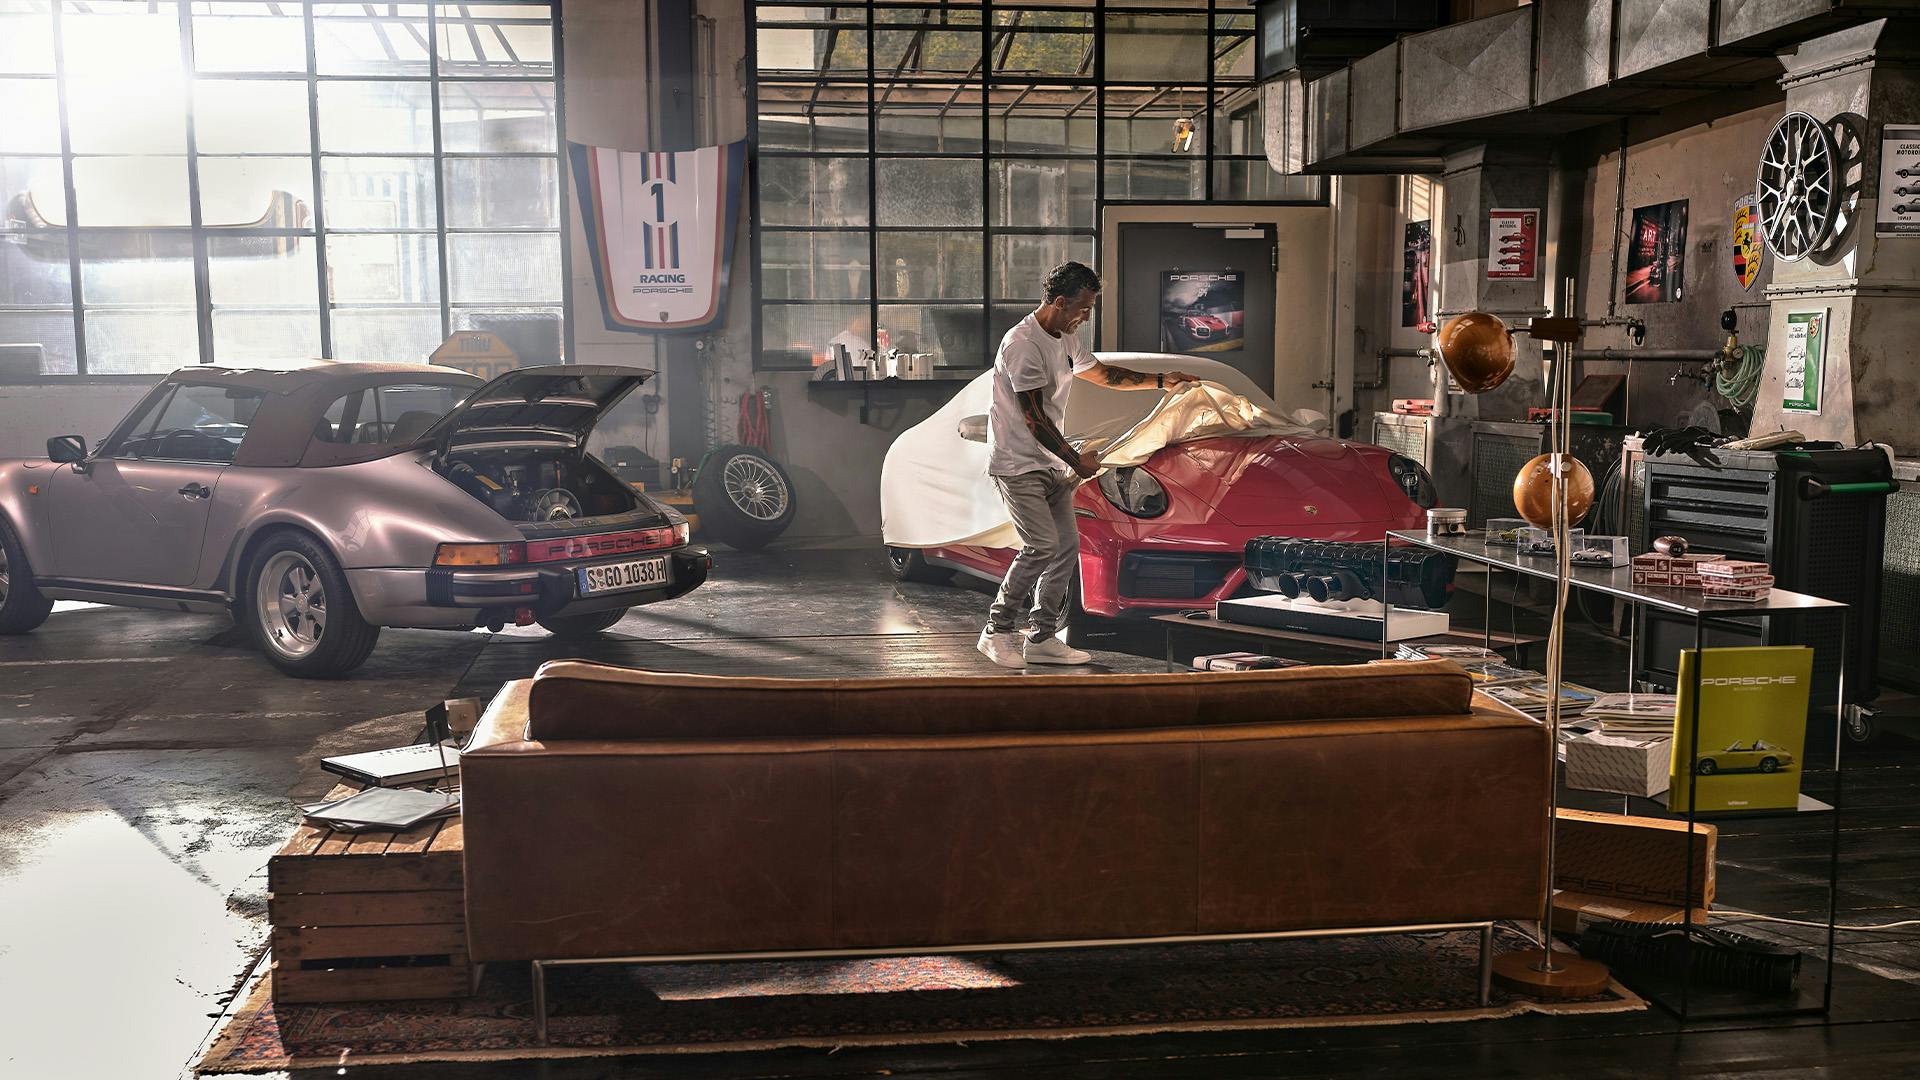 Pictured is a Soul Garage with a man covering a red 911. On the left of the picture is a vintage Porsche car. In the foreground is a brown leather sofa and to the right is a floor lamp. Frontally on the wall there is a hood and on the right side of the wall there is a rim wall clock. Soul Garage is equipped with many accessories like a soundbar or a sideboard with model cars.